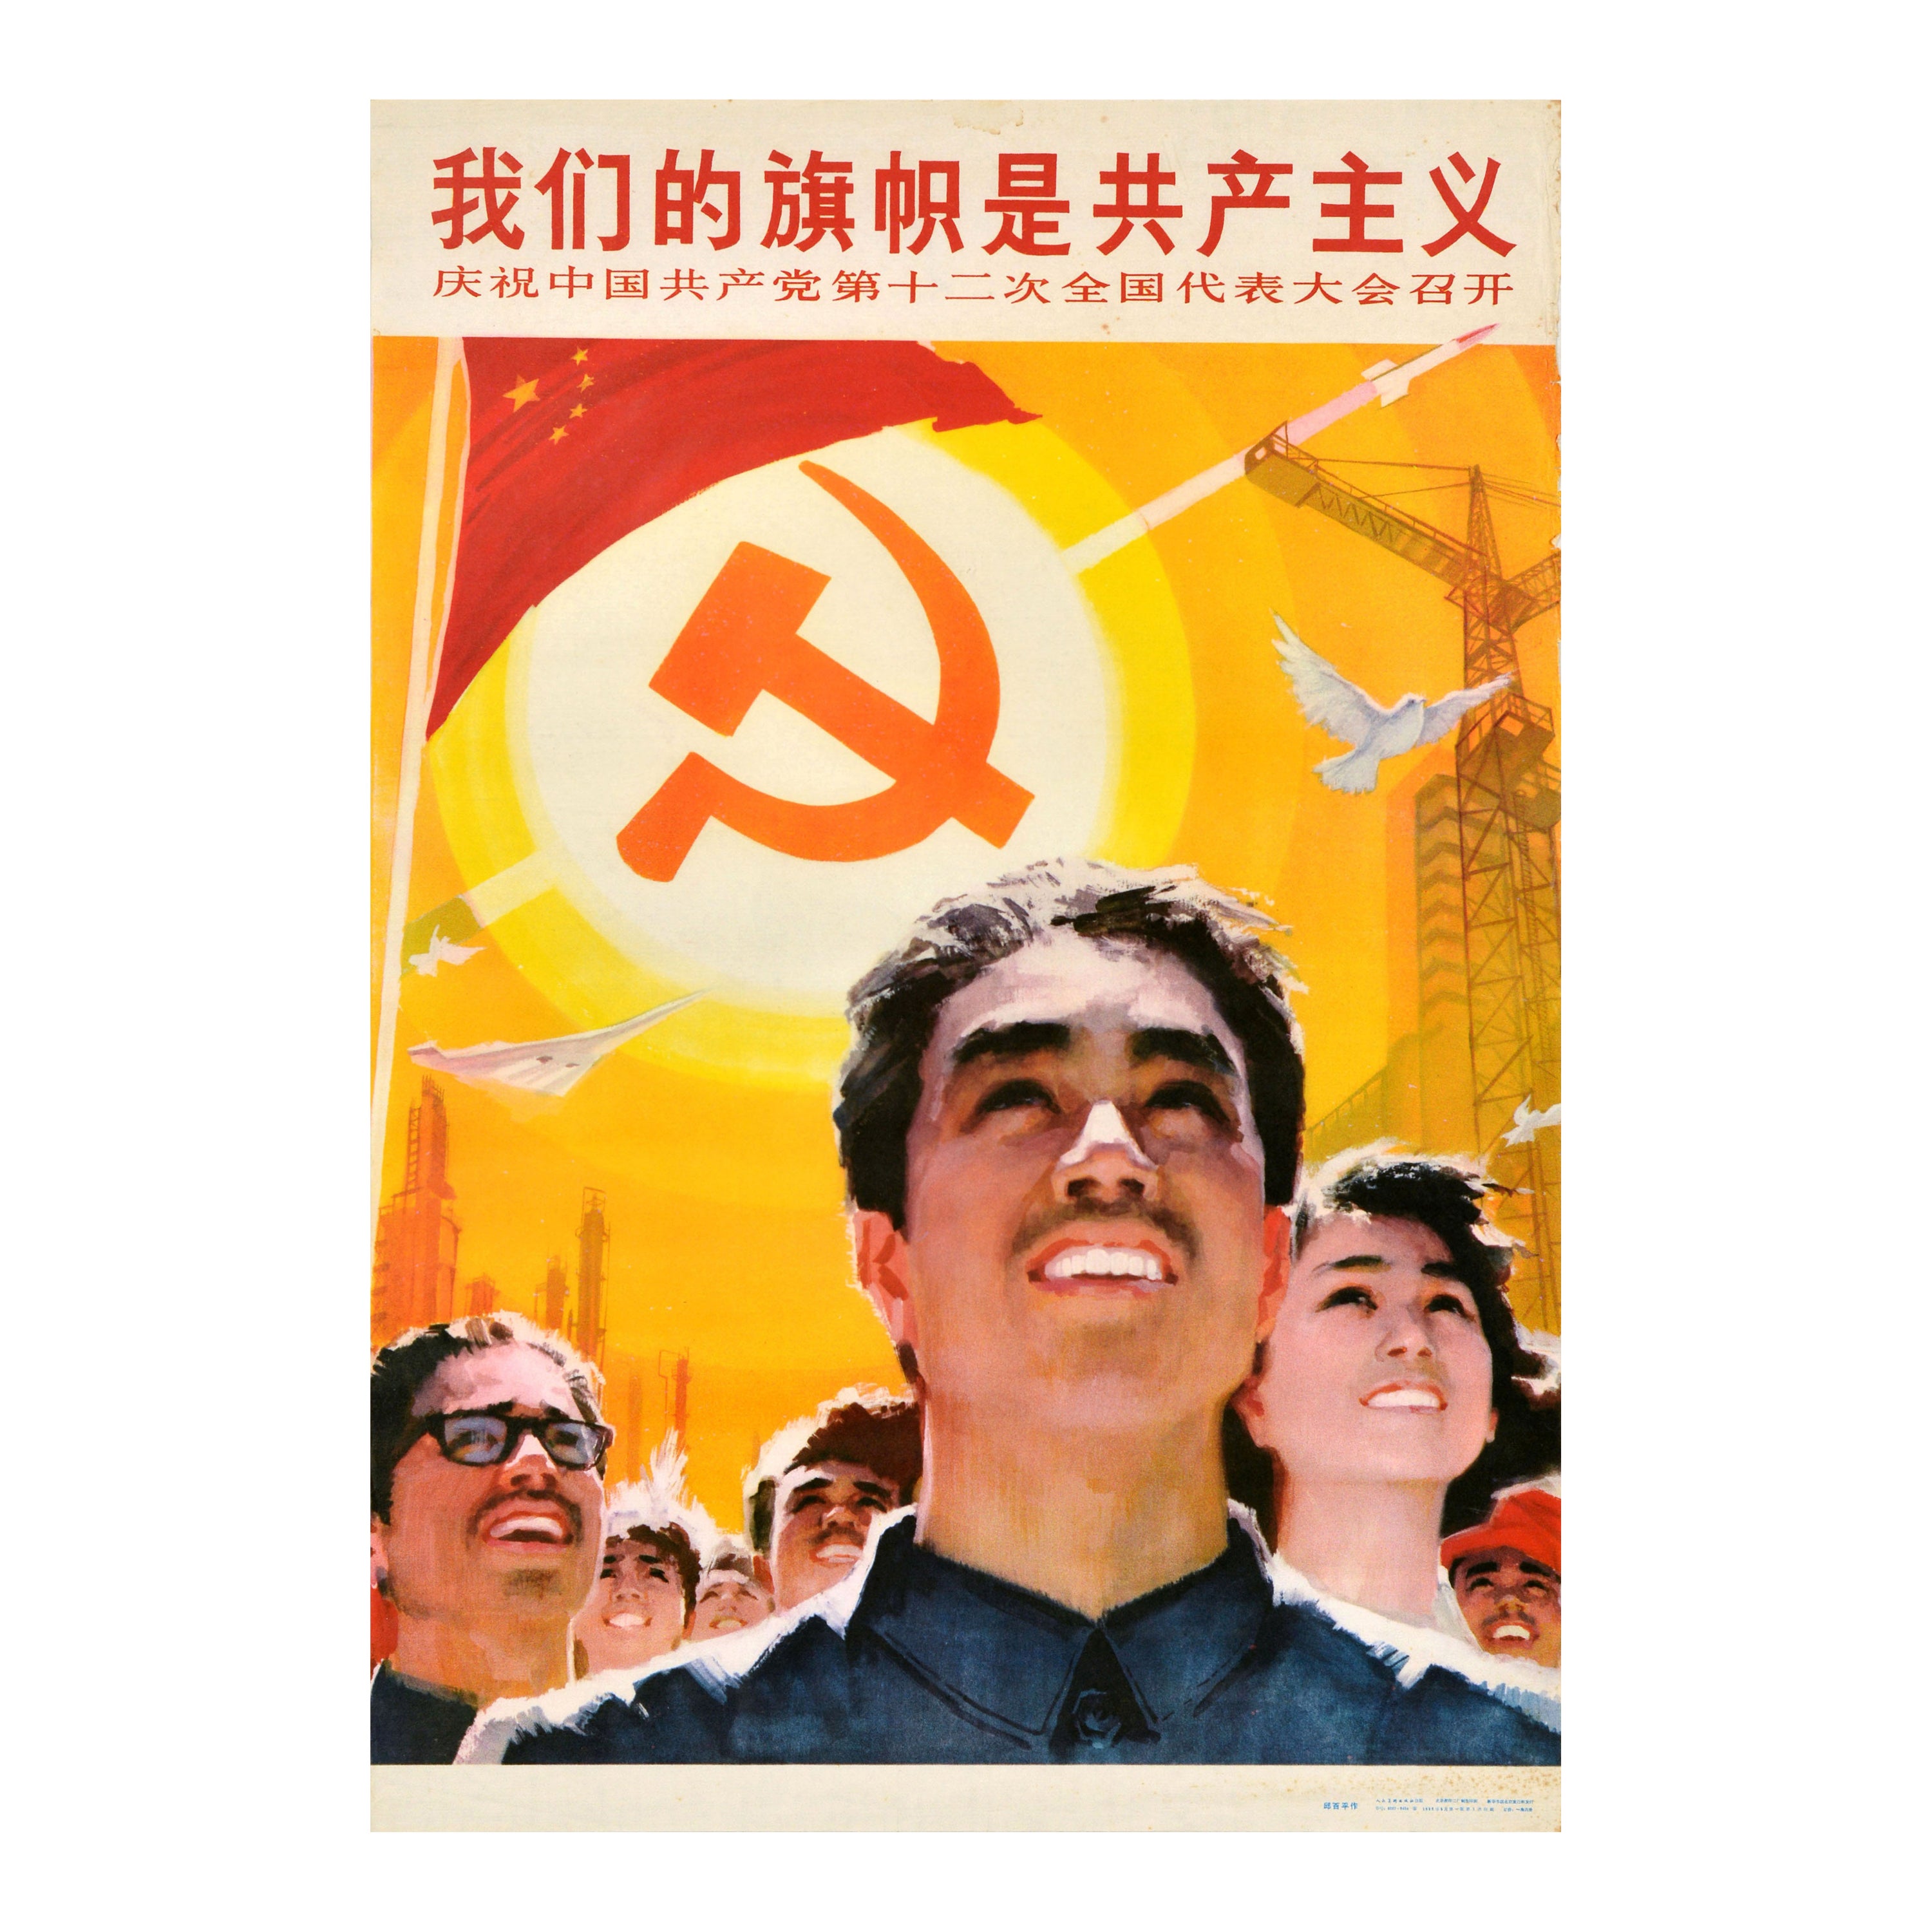 Original Vintage Chinese Communist Party Propaganda Poster Our Flag Is Communism